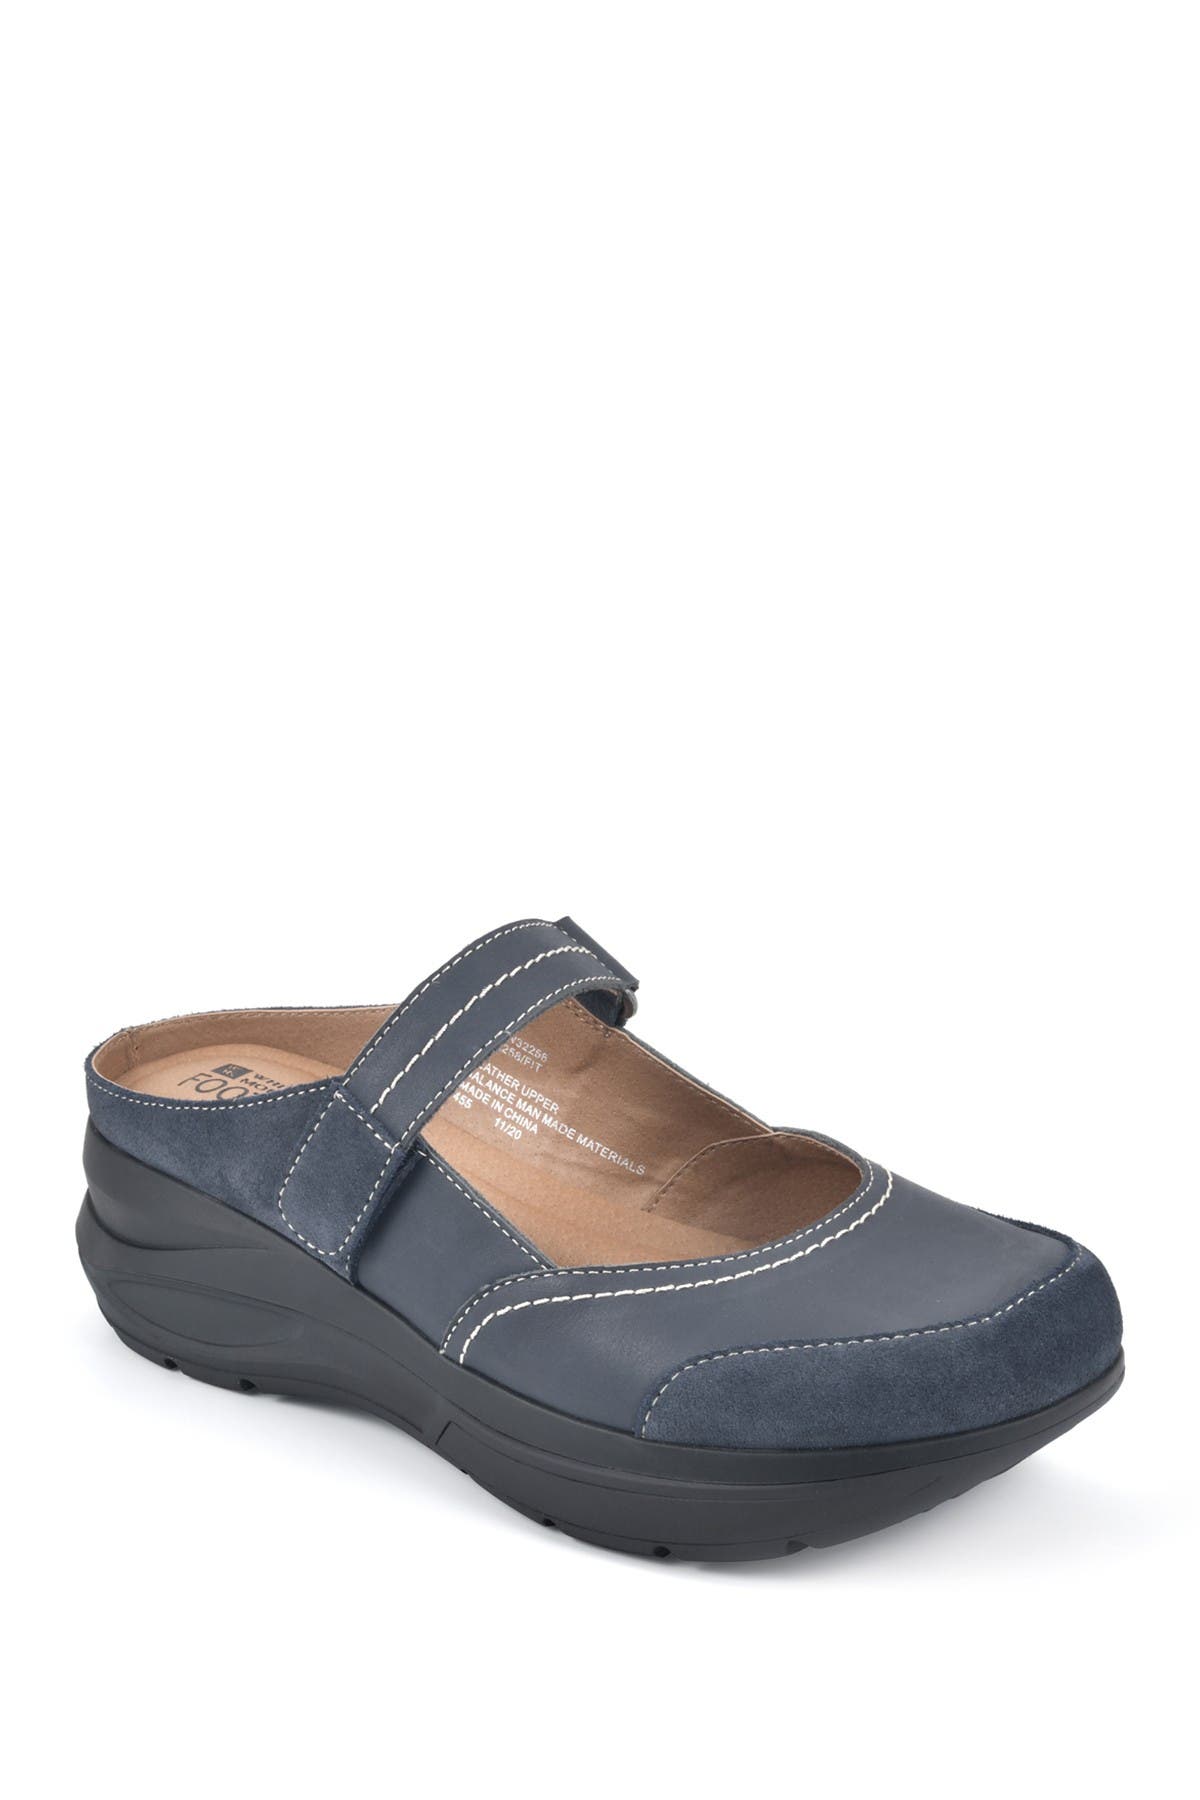 White Mountain Footwear Fit Leather Mary-jane Mule In Navy/leather ...